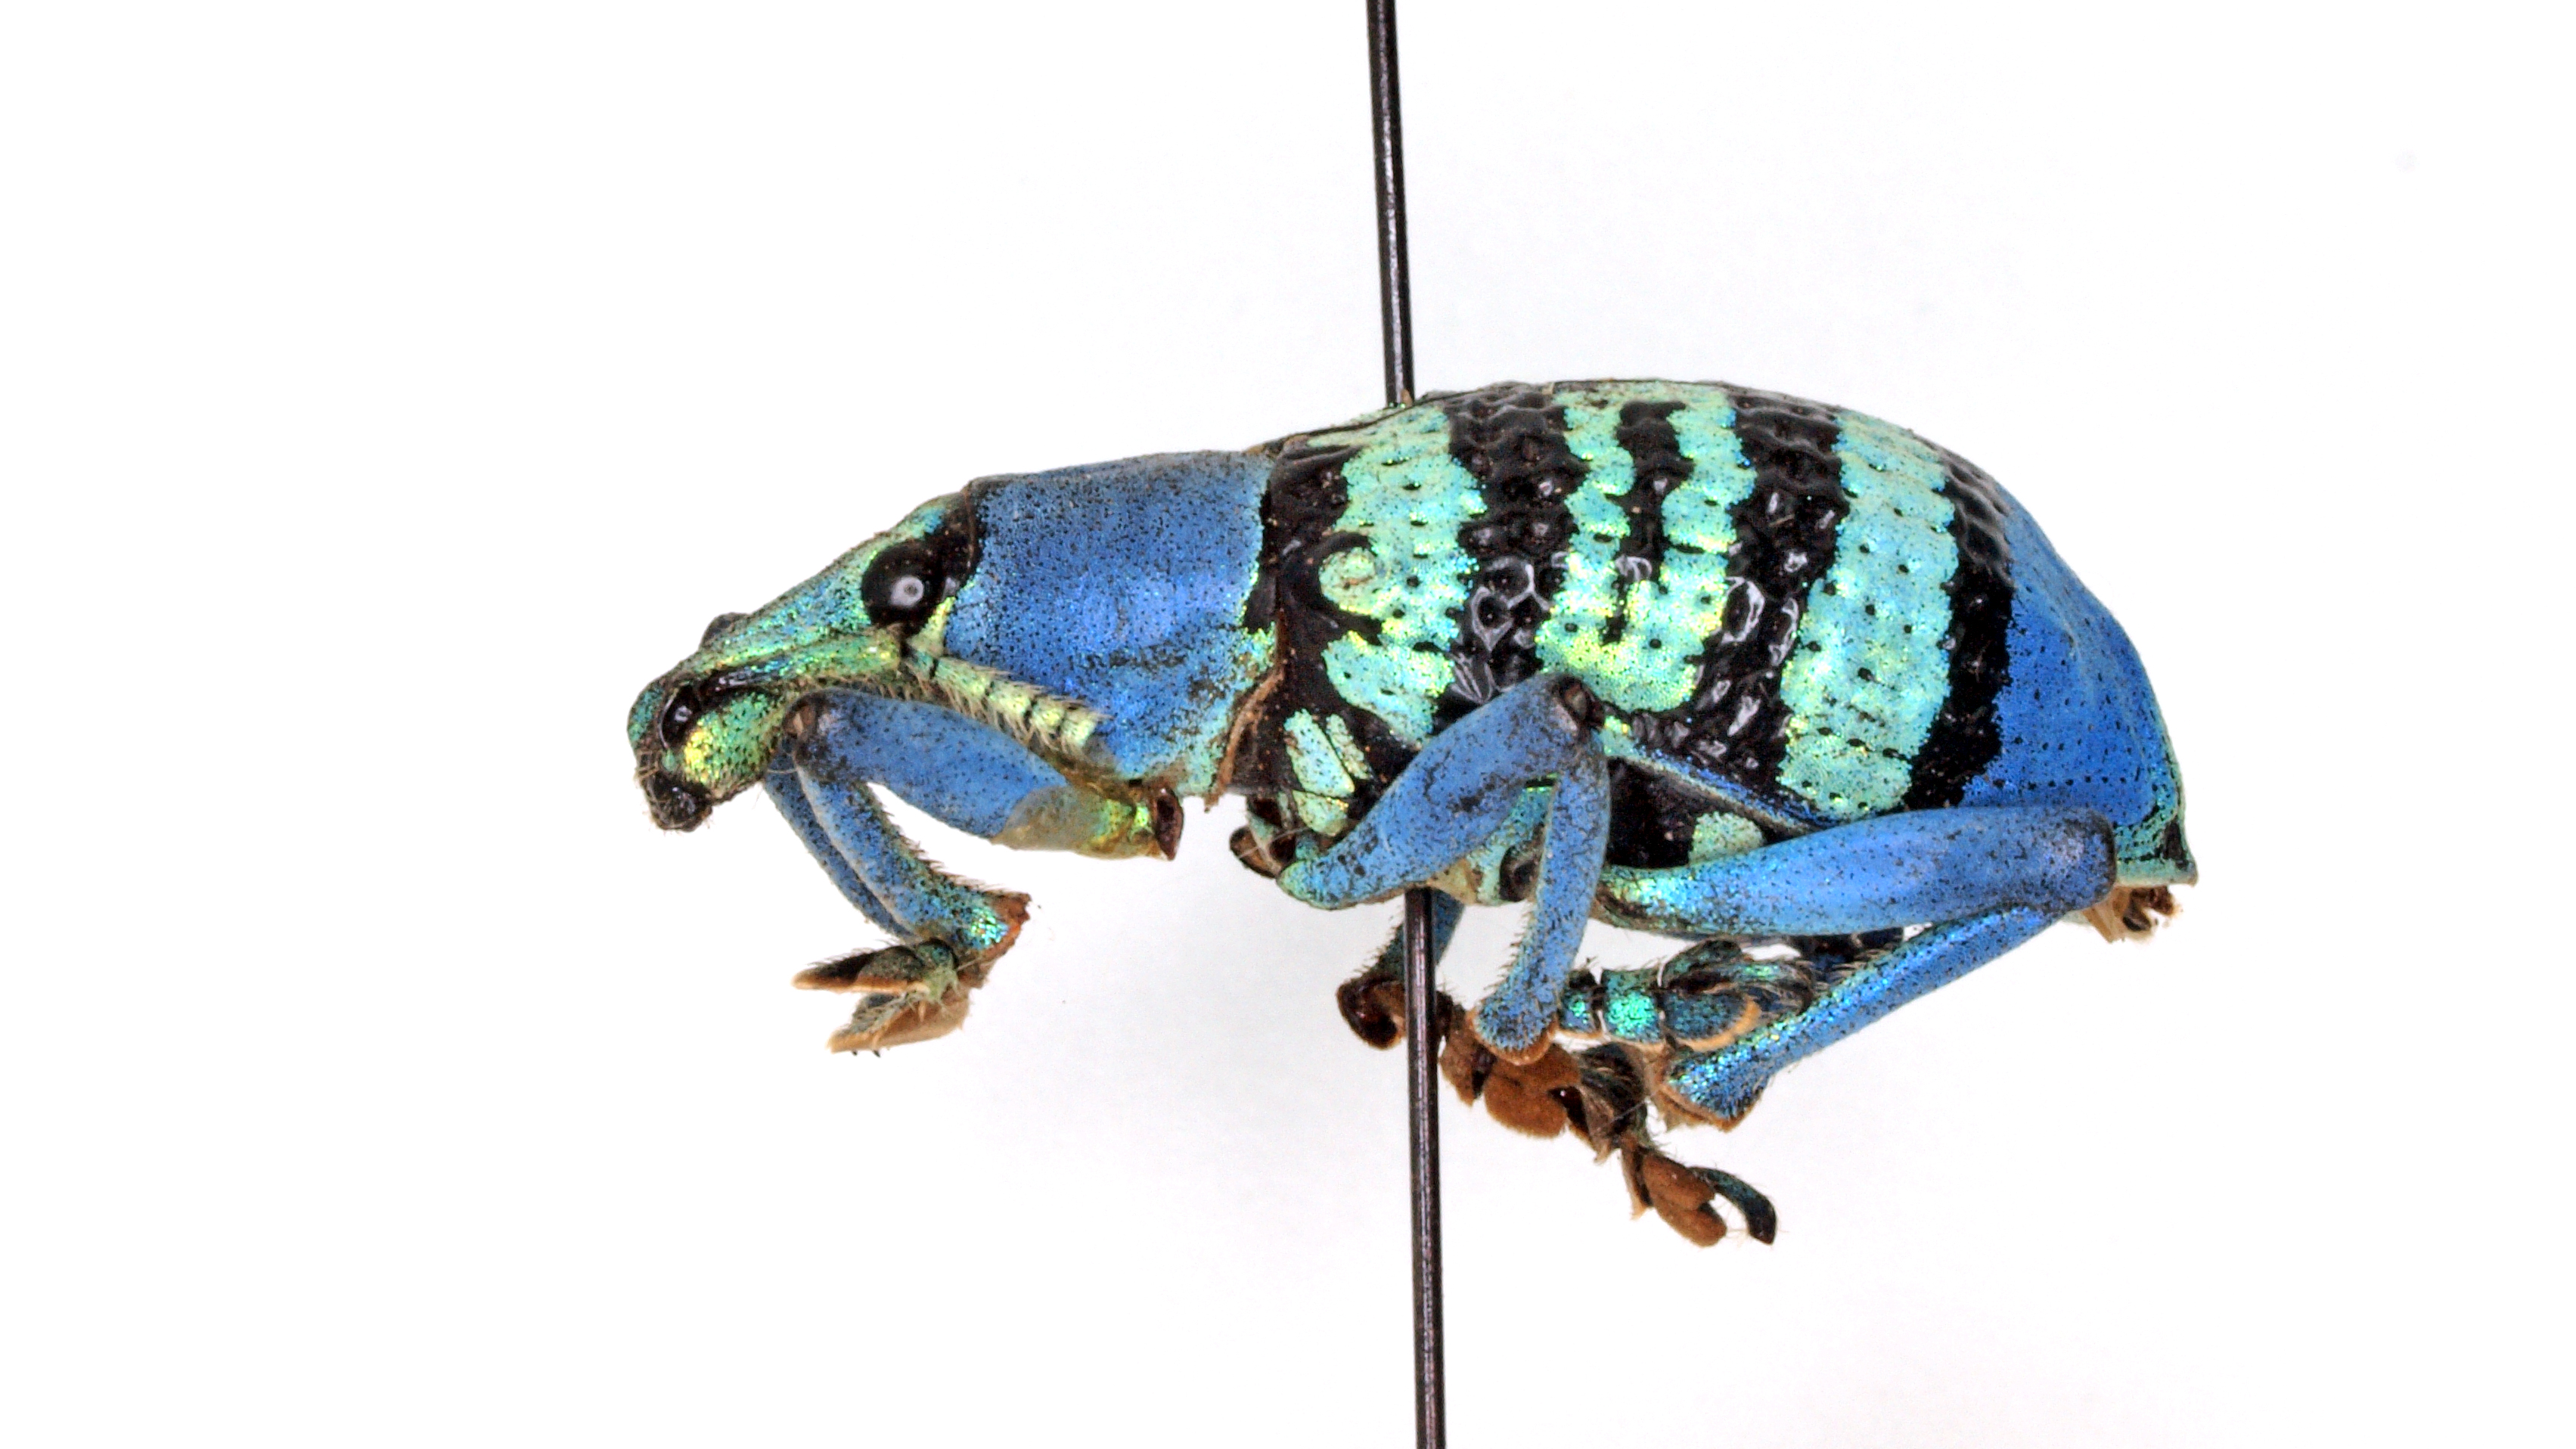 Why is This Weevil #BlueandBlack? And How Do We Know? – Drexel News Blog